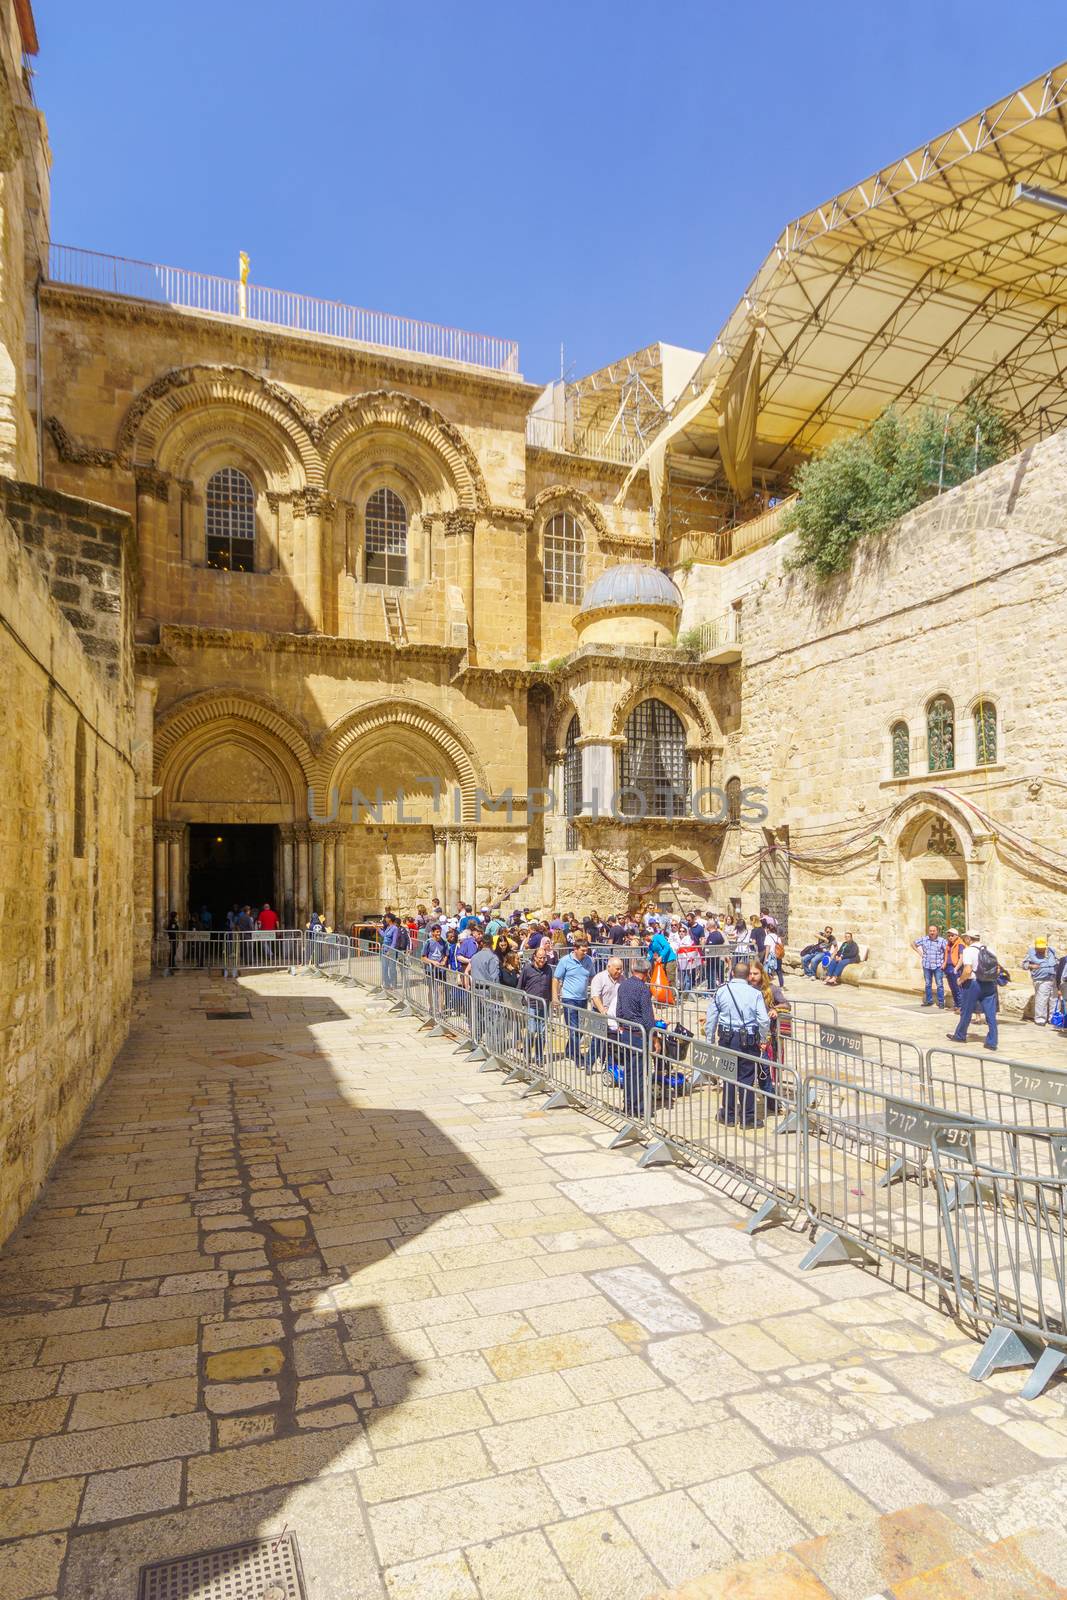 Jerusalem, Israel - April 6, 2018: Orthodox good Friday scene in the entry yard of the church of the holy sepulcher, with pilgrims. The old city of Jerusalem, Israel